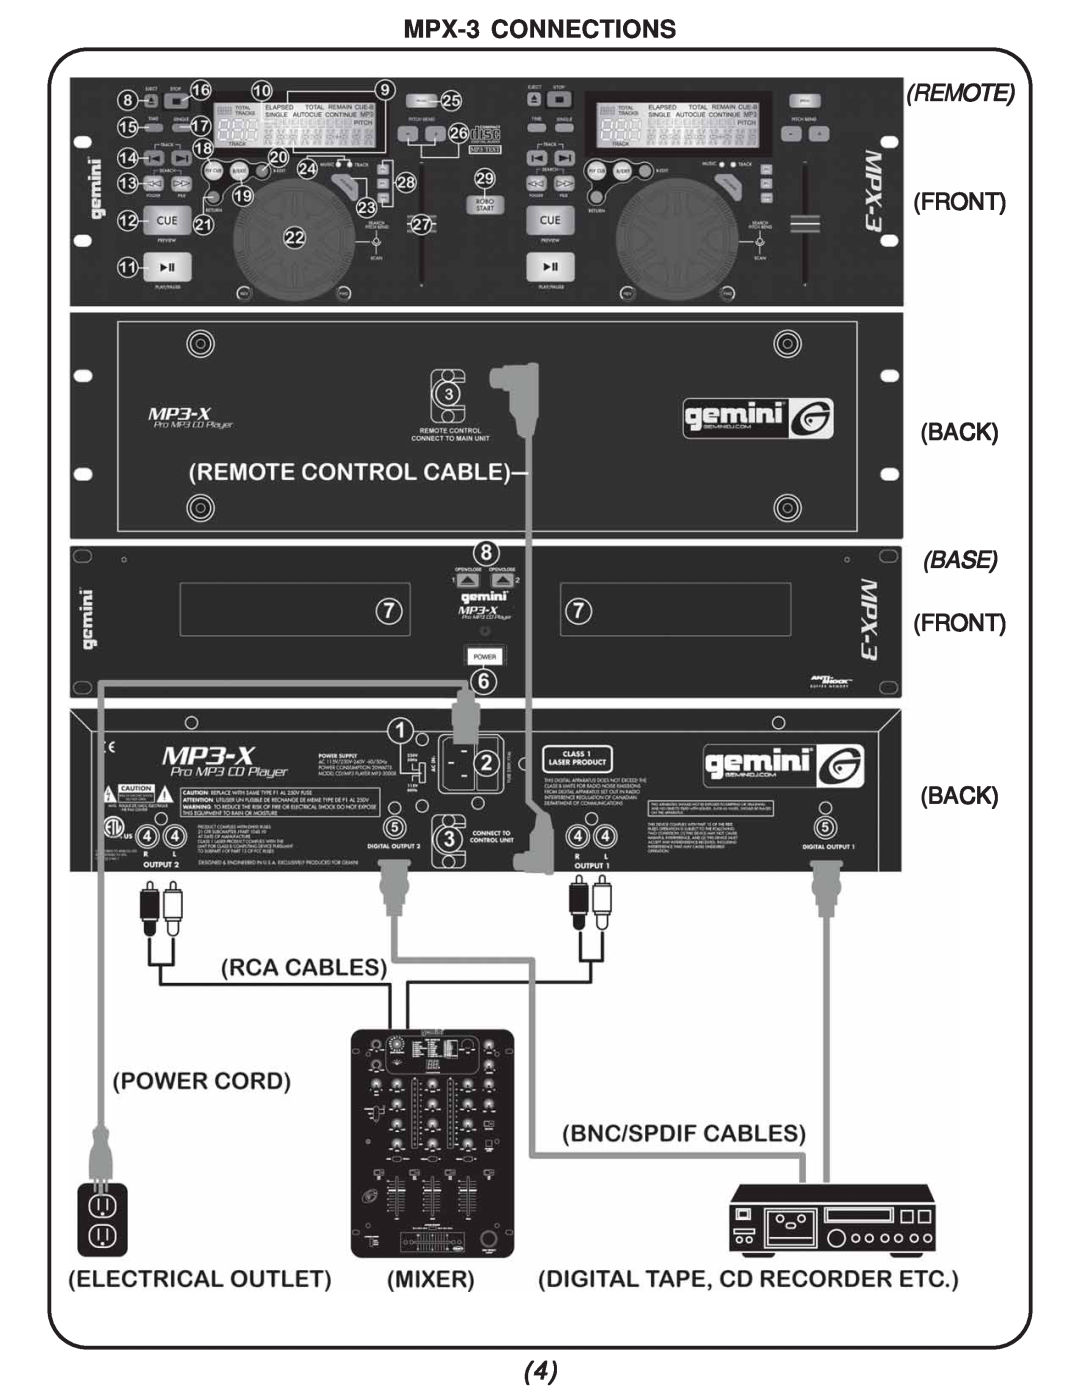 Gemini manual MPX-3CONNECTIONS, Remote, Front Back, Base 